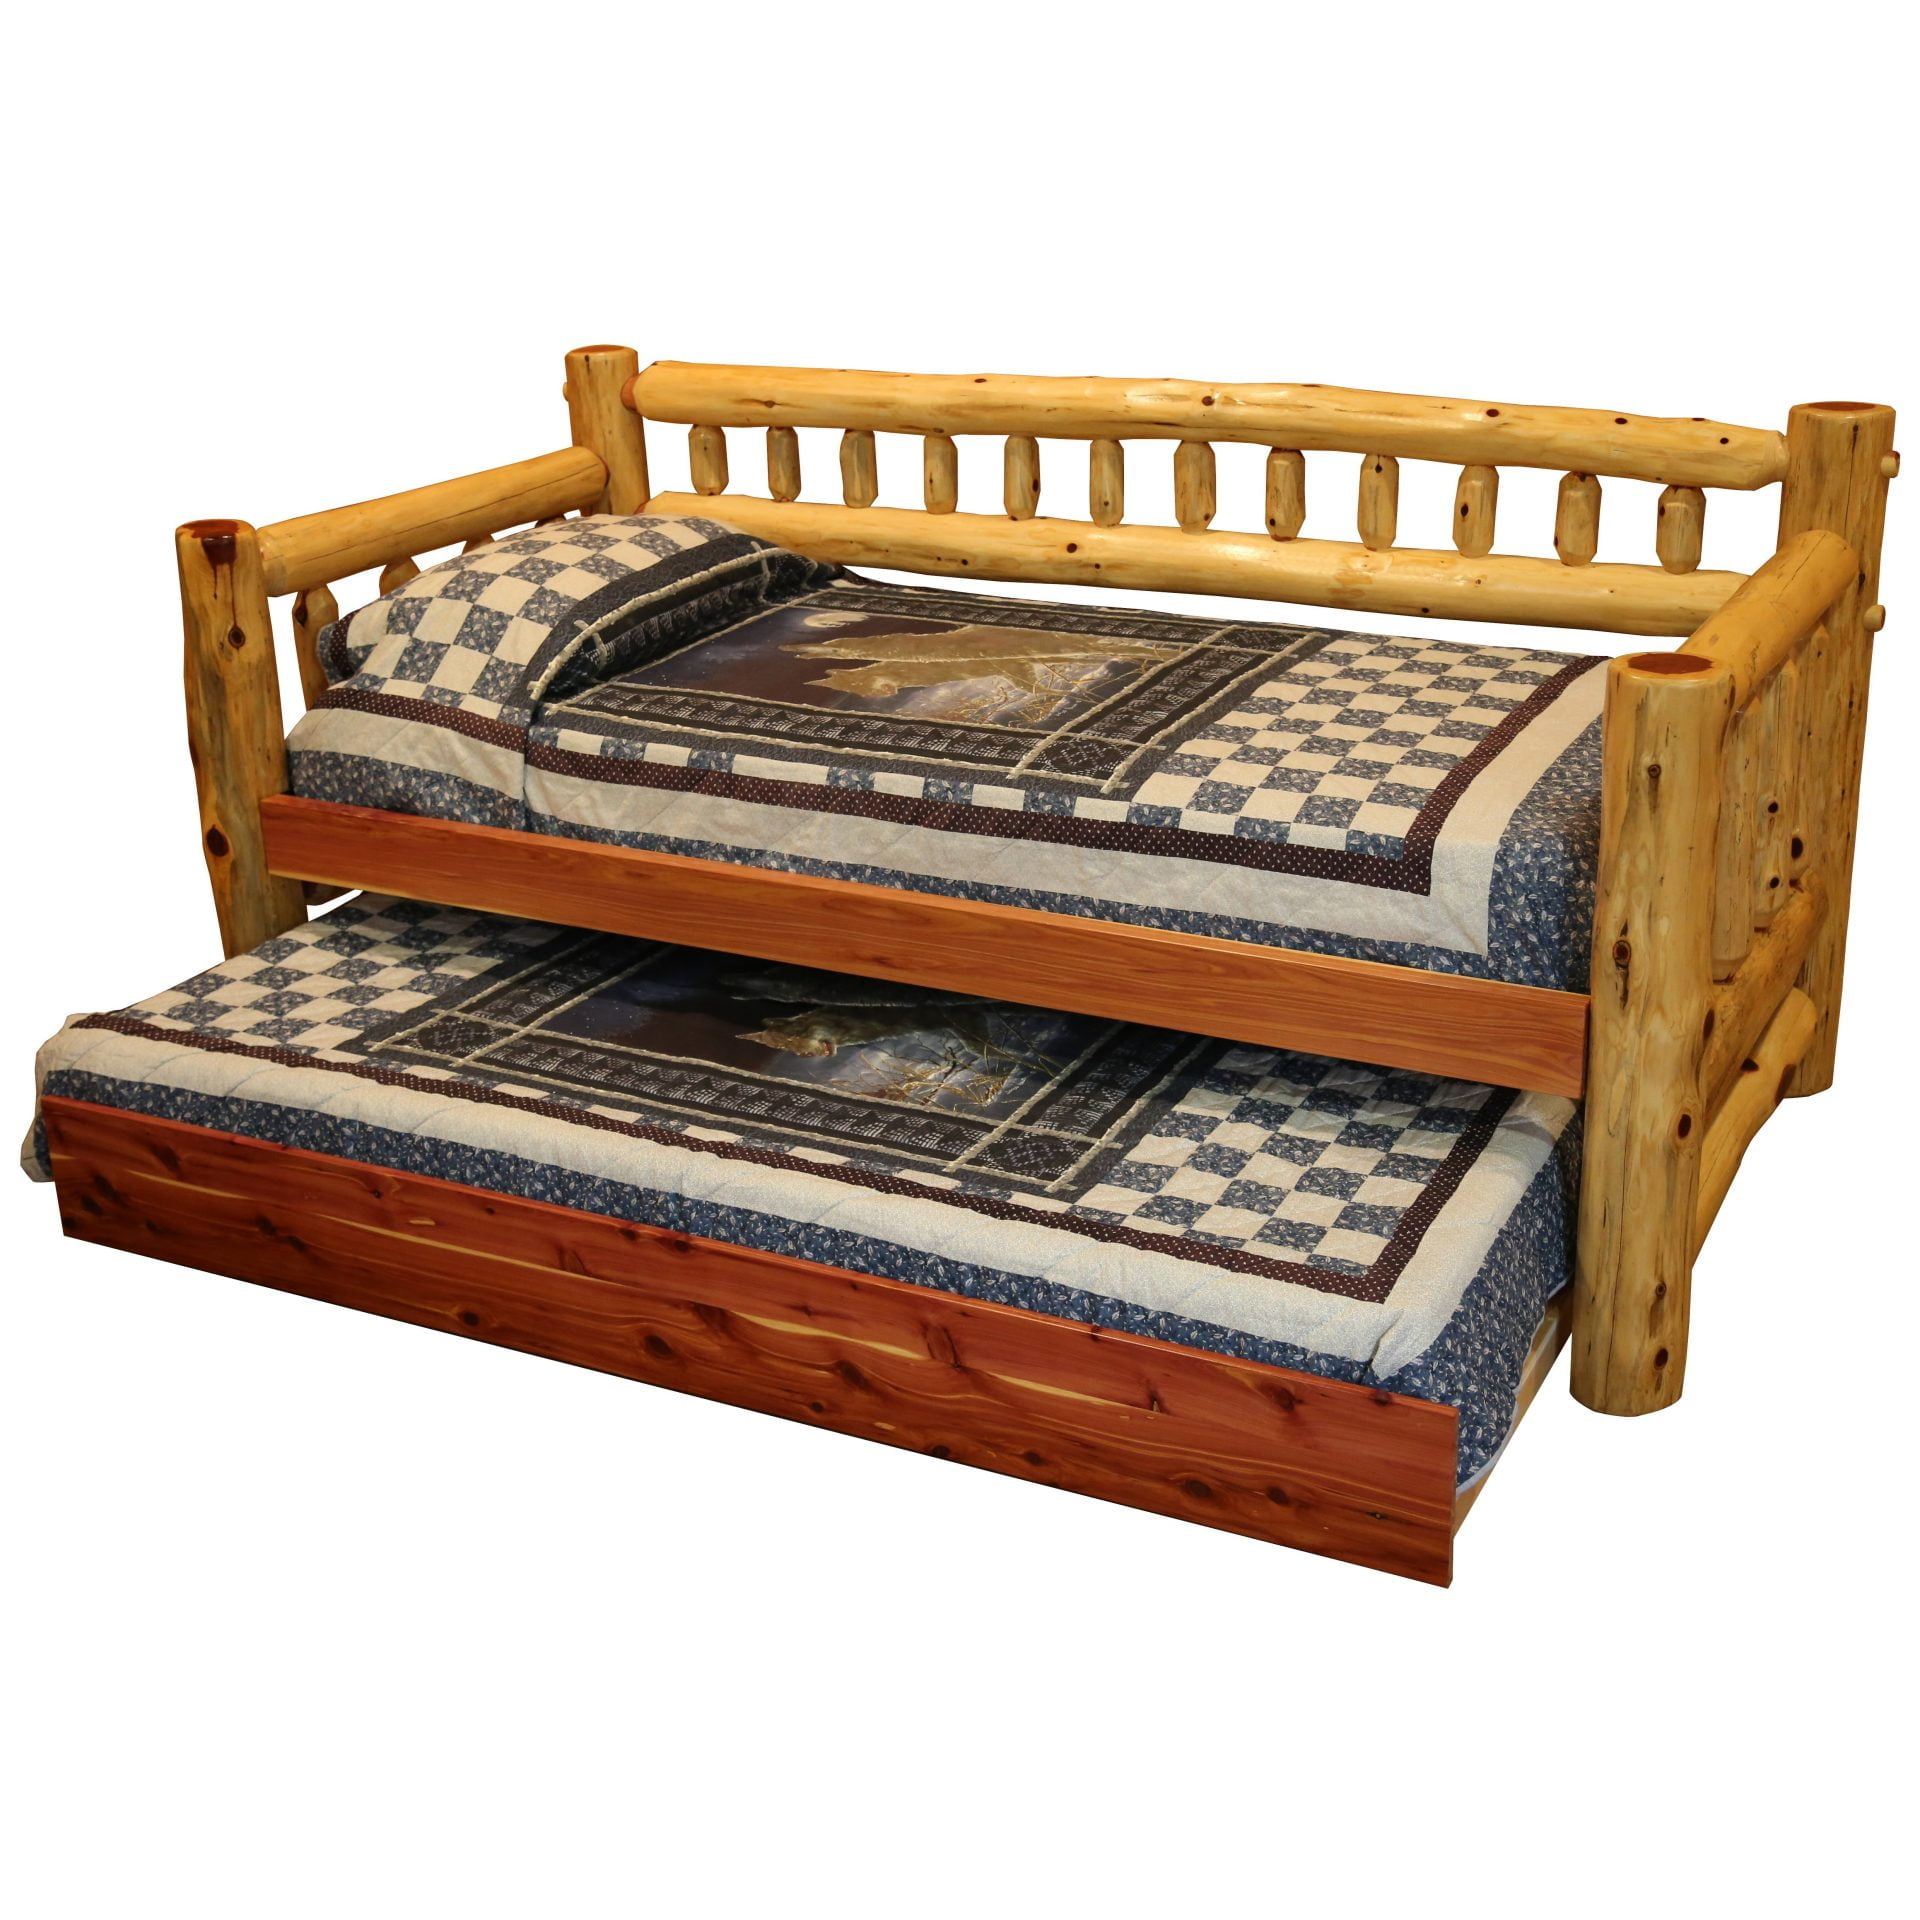 Rustic Red Cedar Day Bed and Trundle Set